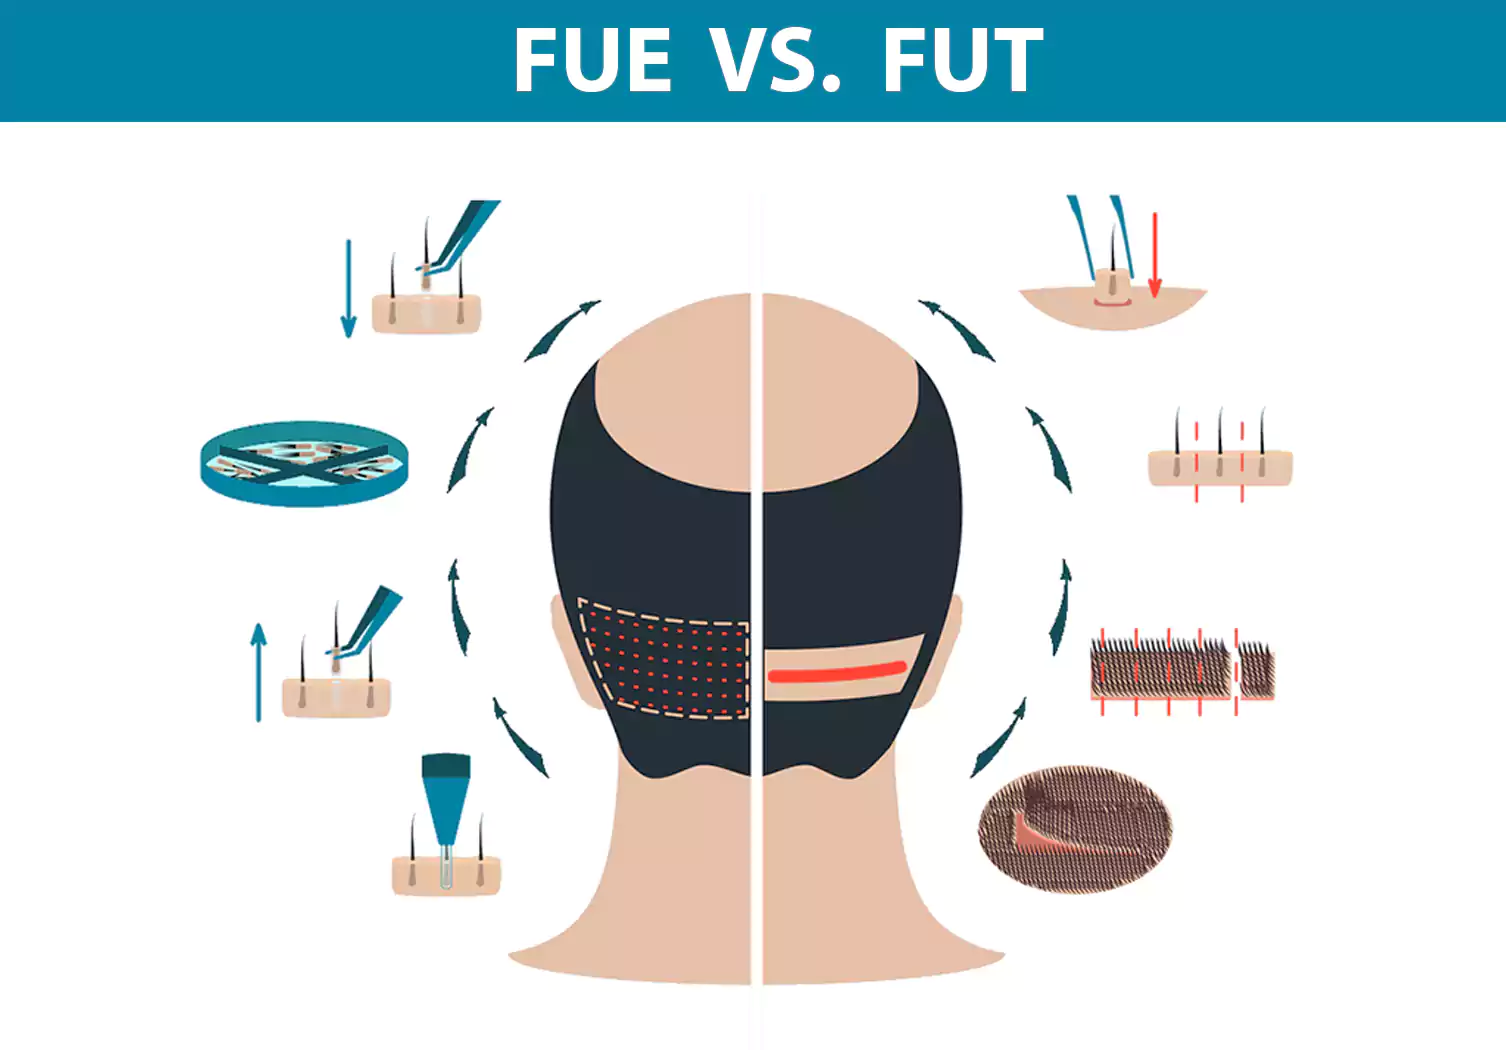 An image showing the difference between FUE hair transplantation and FUT hair transplantation